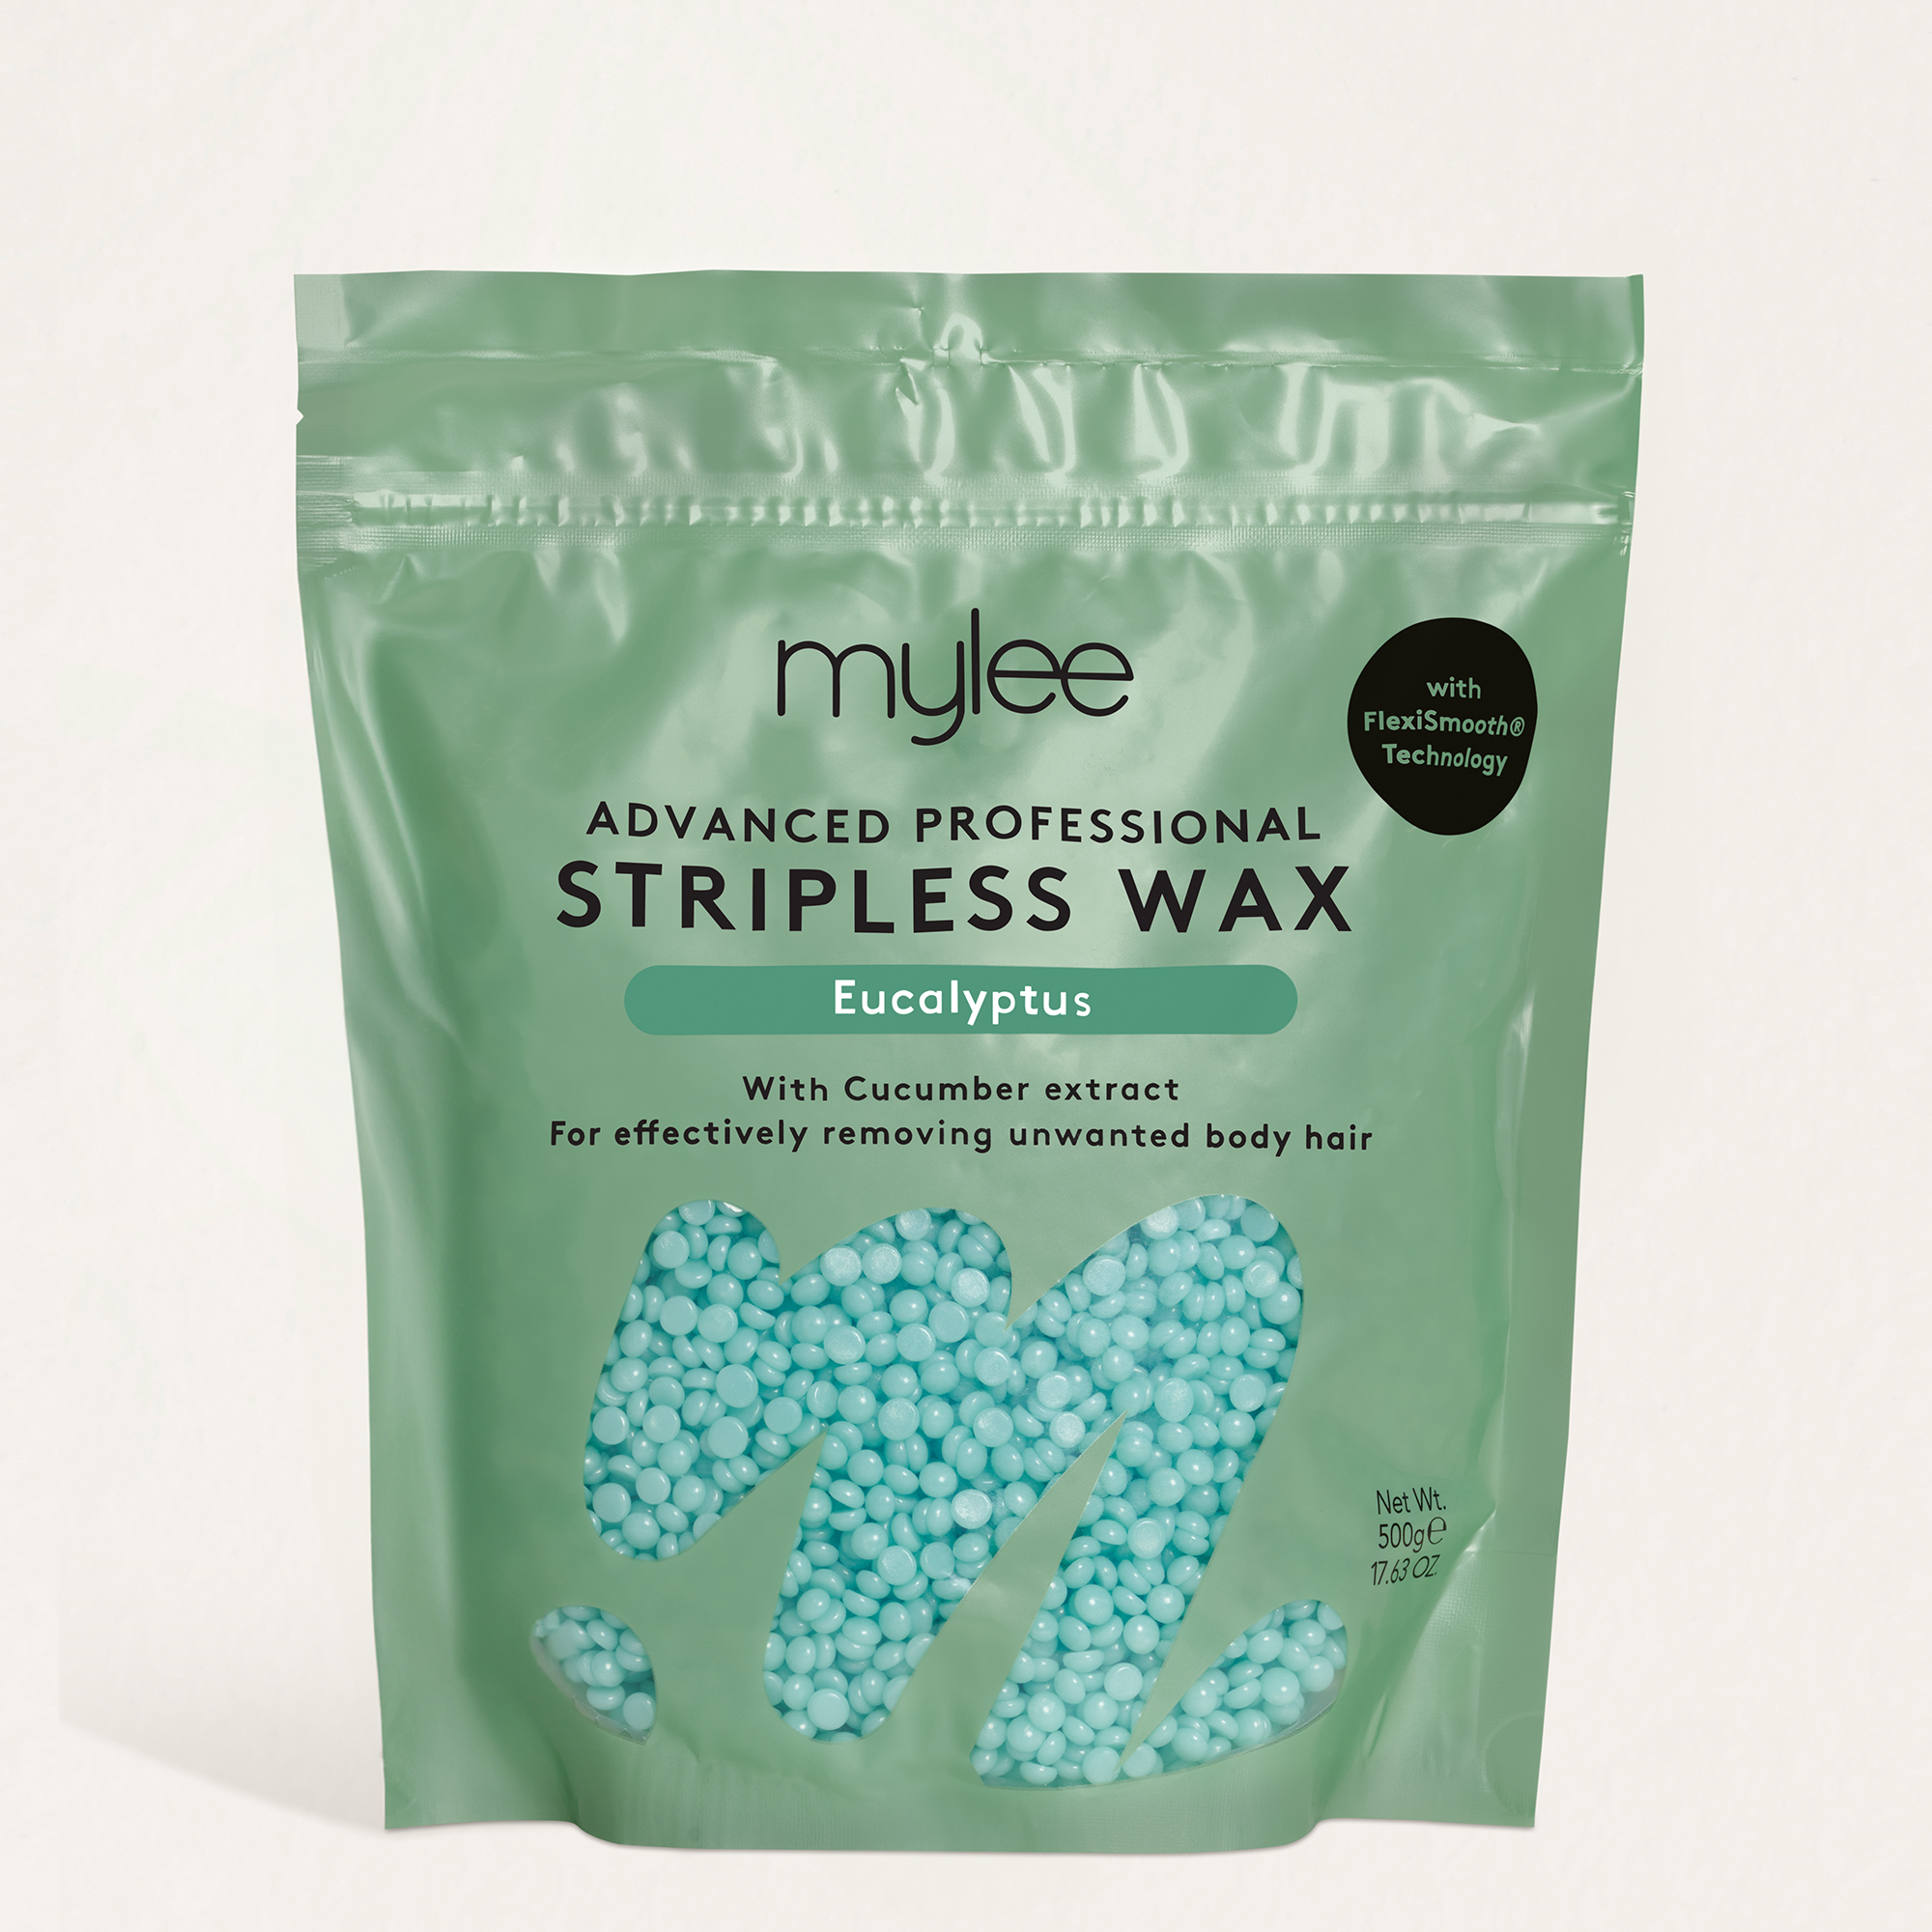 Image of Mylee Advanced Professional Stripless Wax with Flexismooth Technology - Eucalyptus